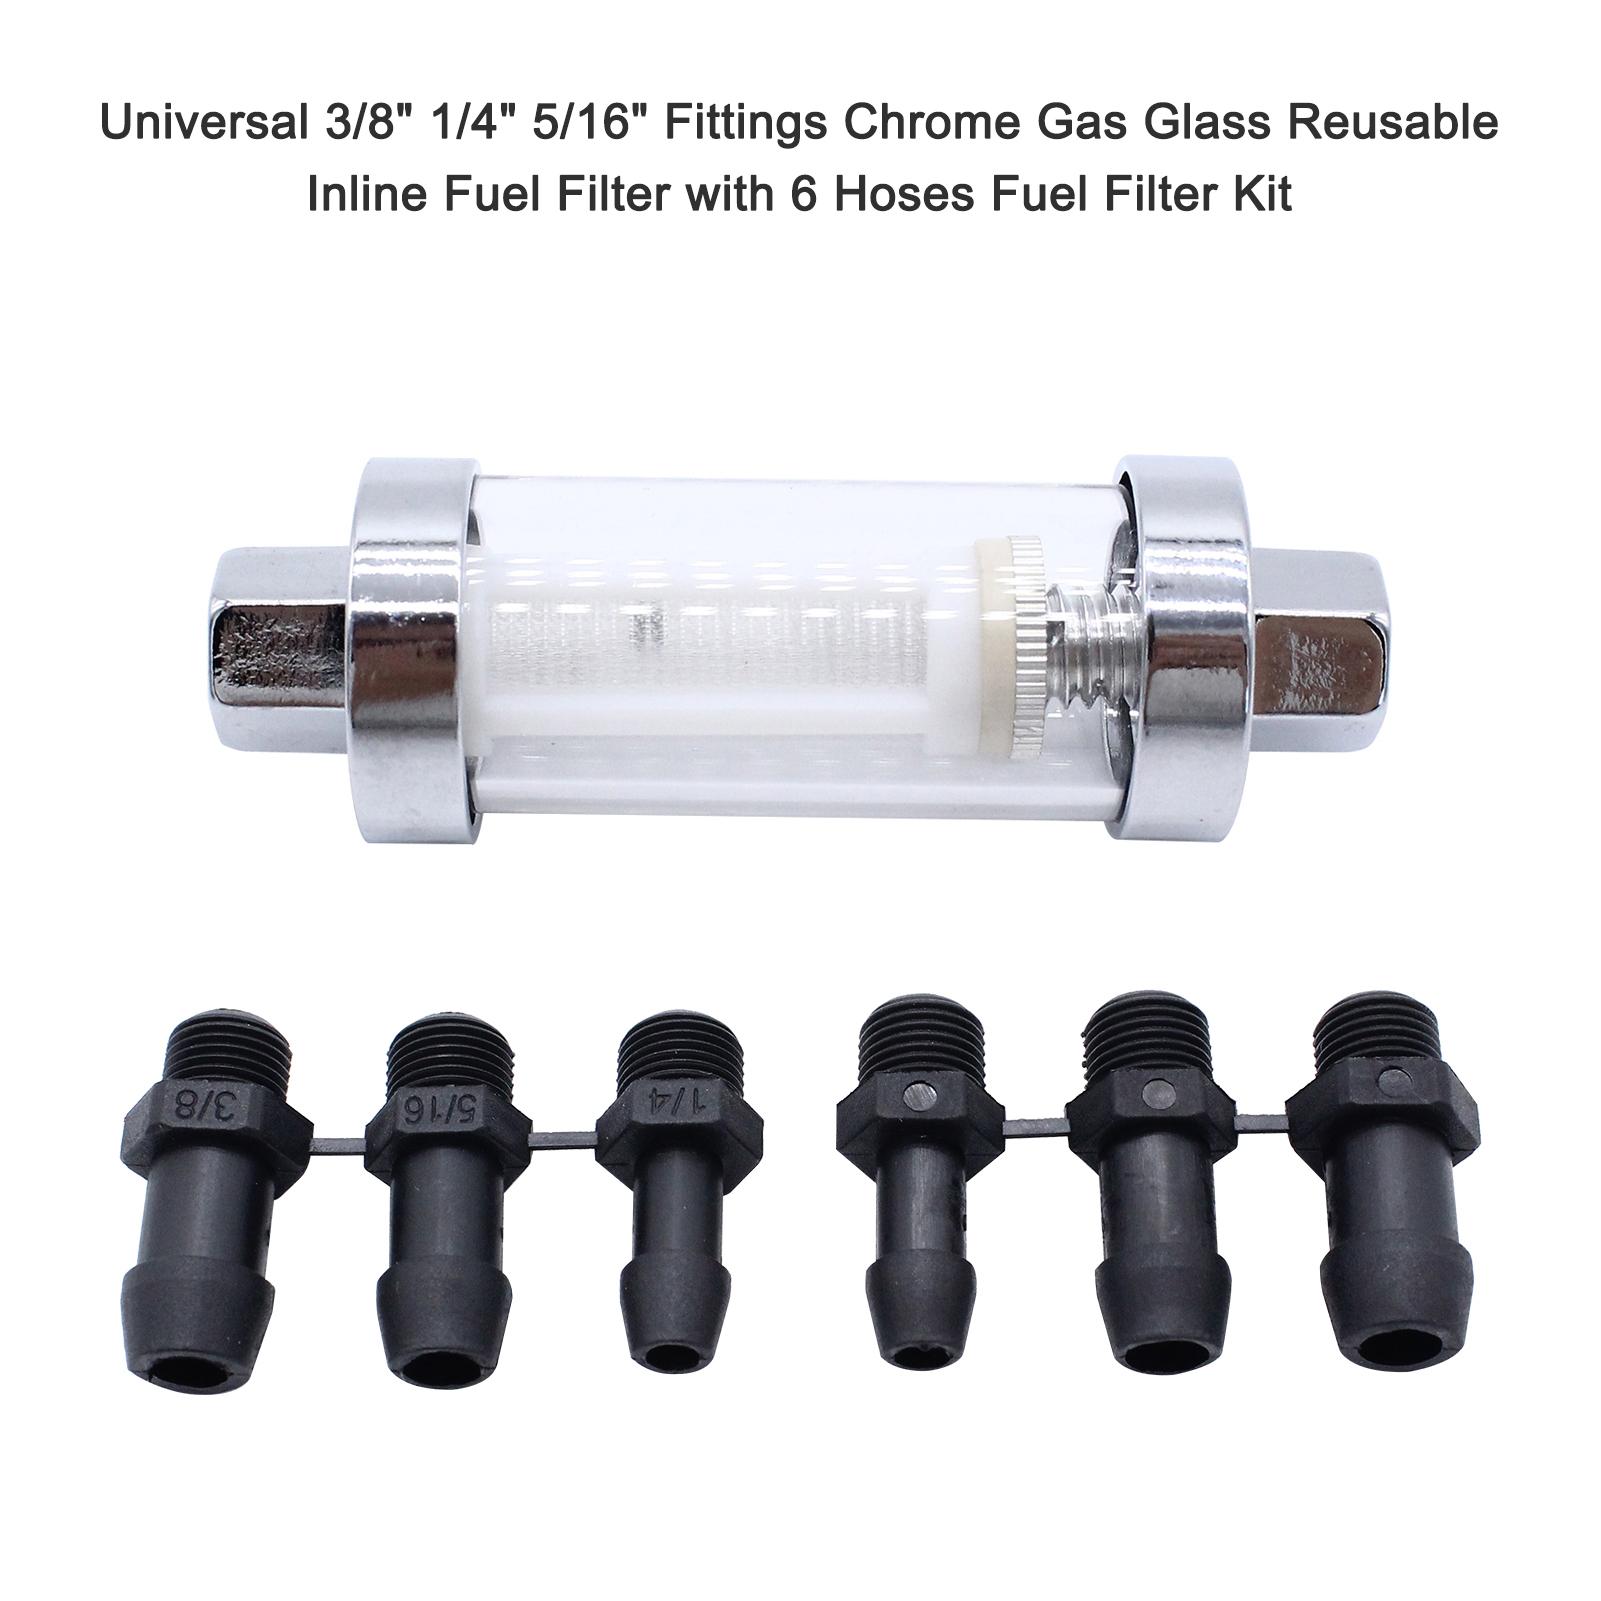 Universal 3/8'' 1/4'' 5/16'' Fittings Chrome Gas Glass Reusable Inline Fuel Filter with 6 Hoses Fuel Filter Kit